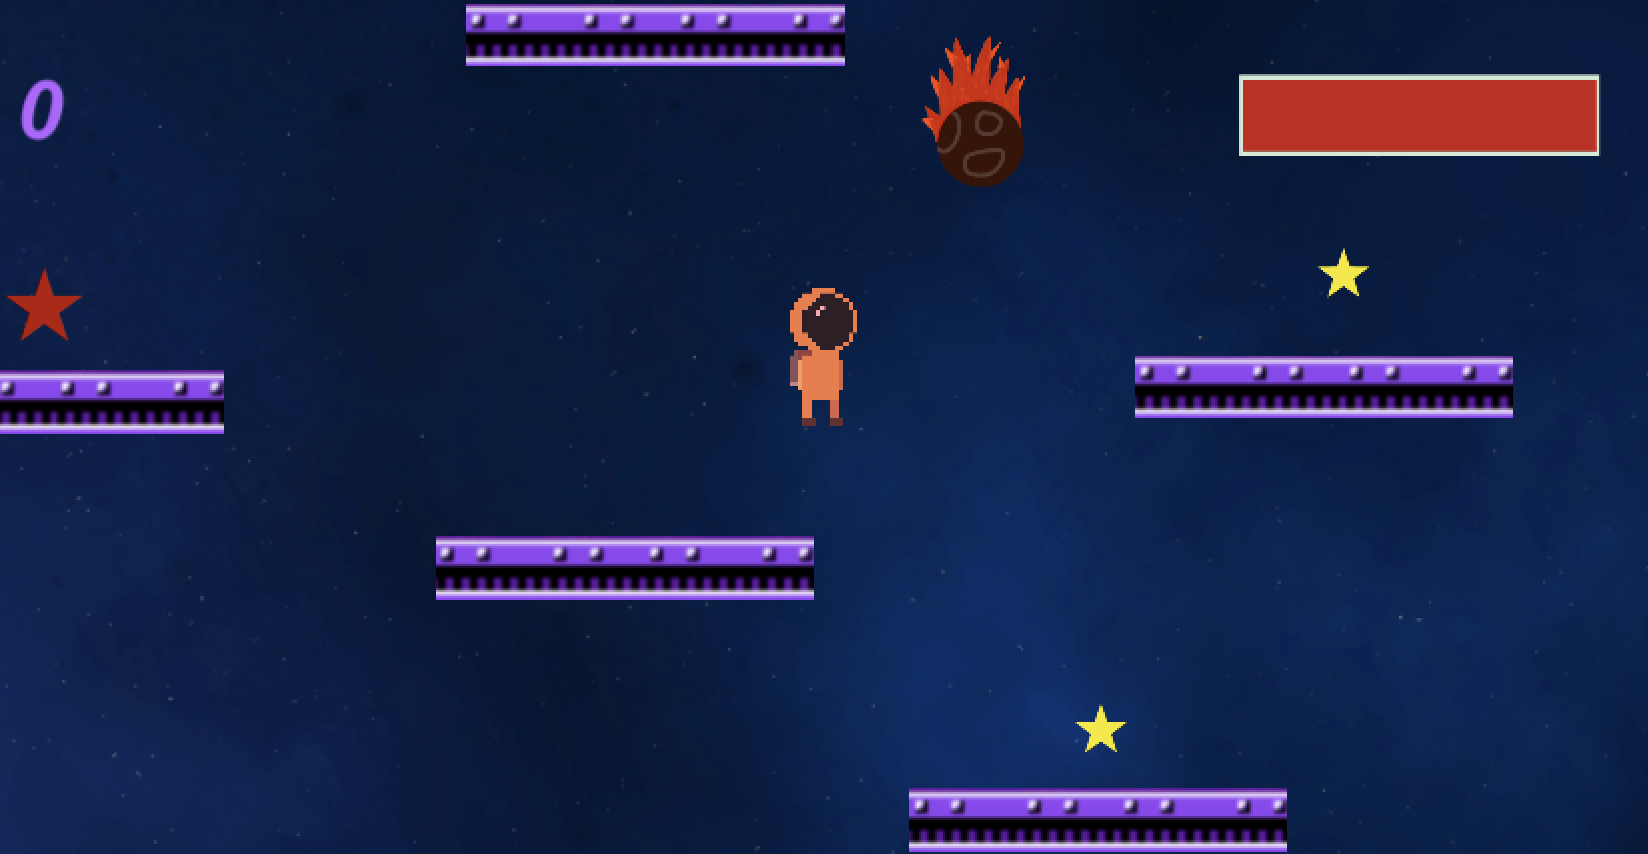 A screenshot from the game Star Bay